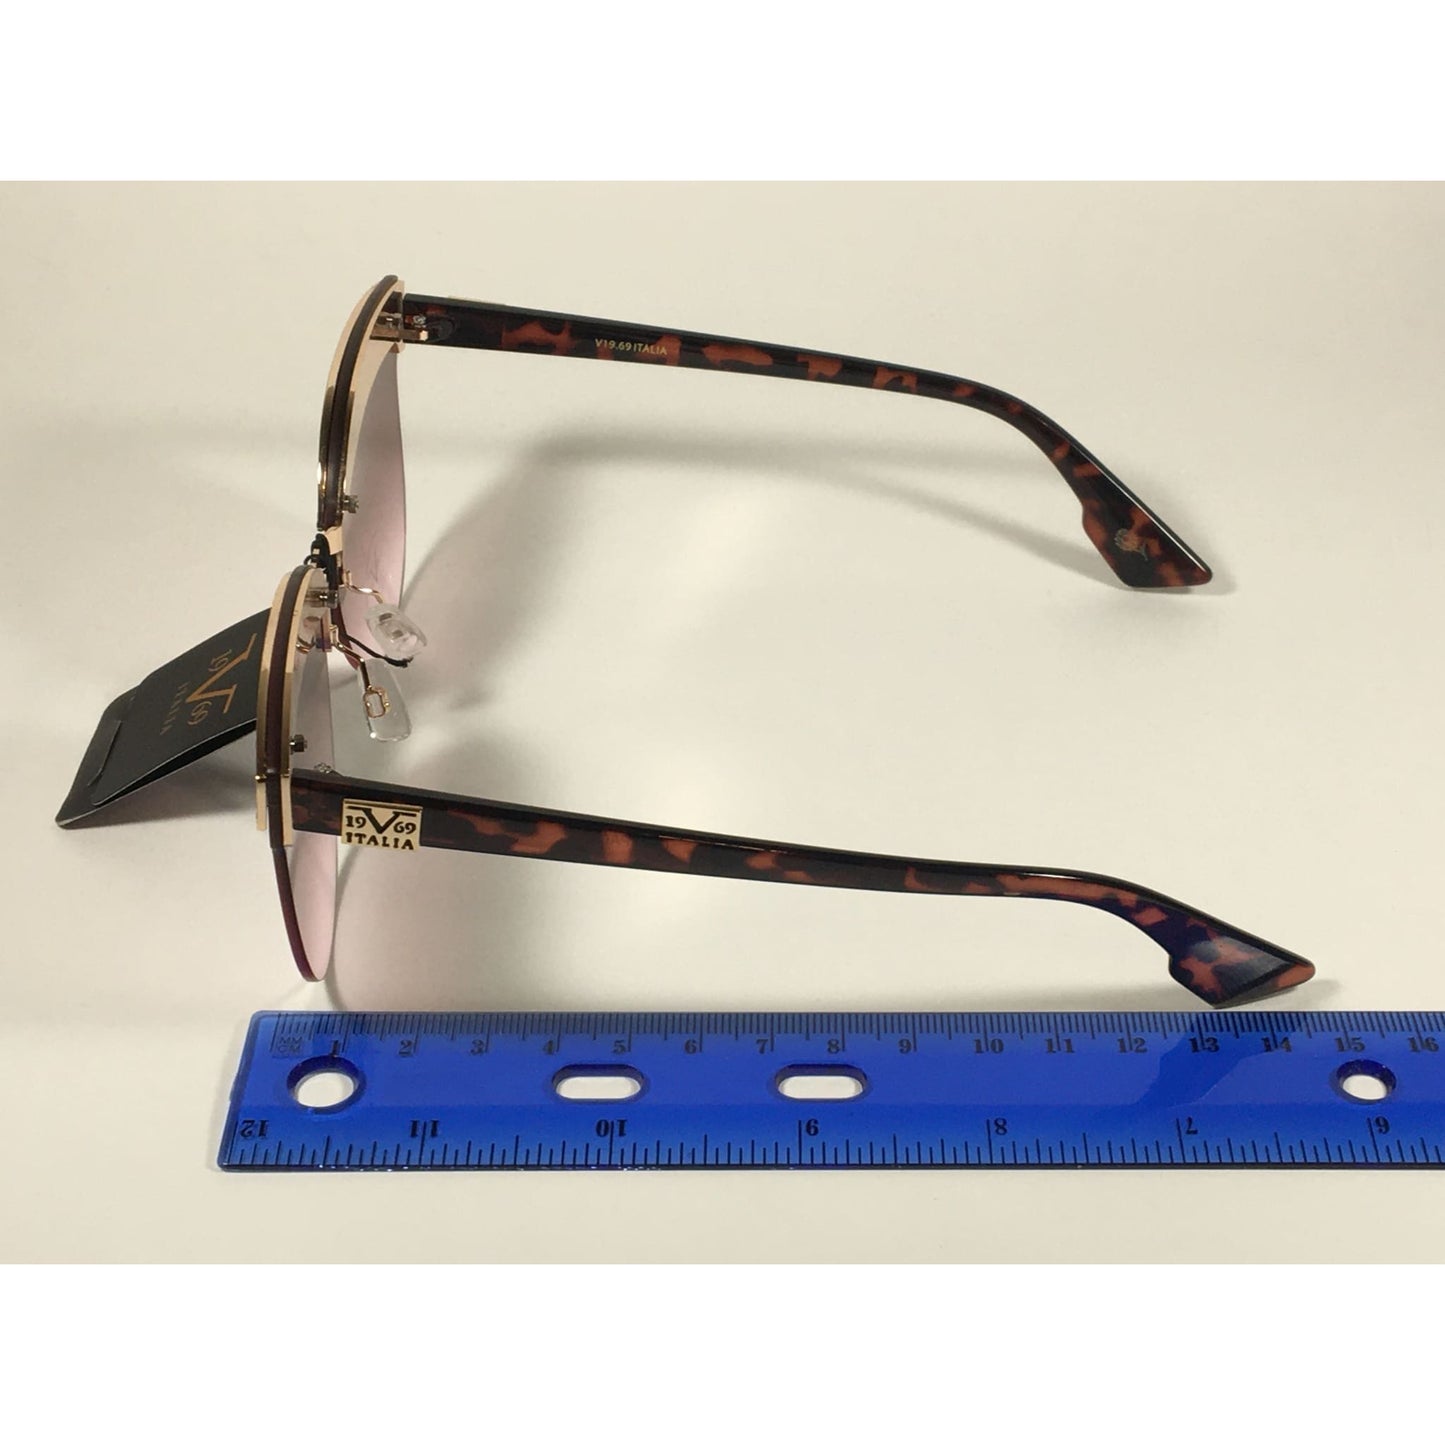 Versace 19V69 Italia Paola Rimless Cat Sunglasses Gold Glitter Brown and Pink Gradient Lens - Sunglasses